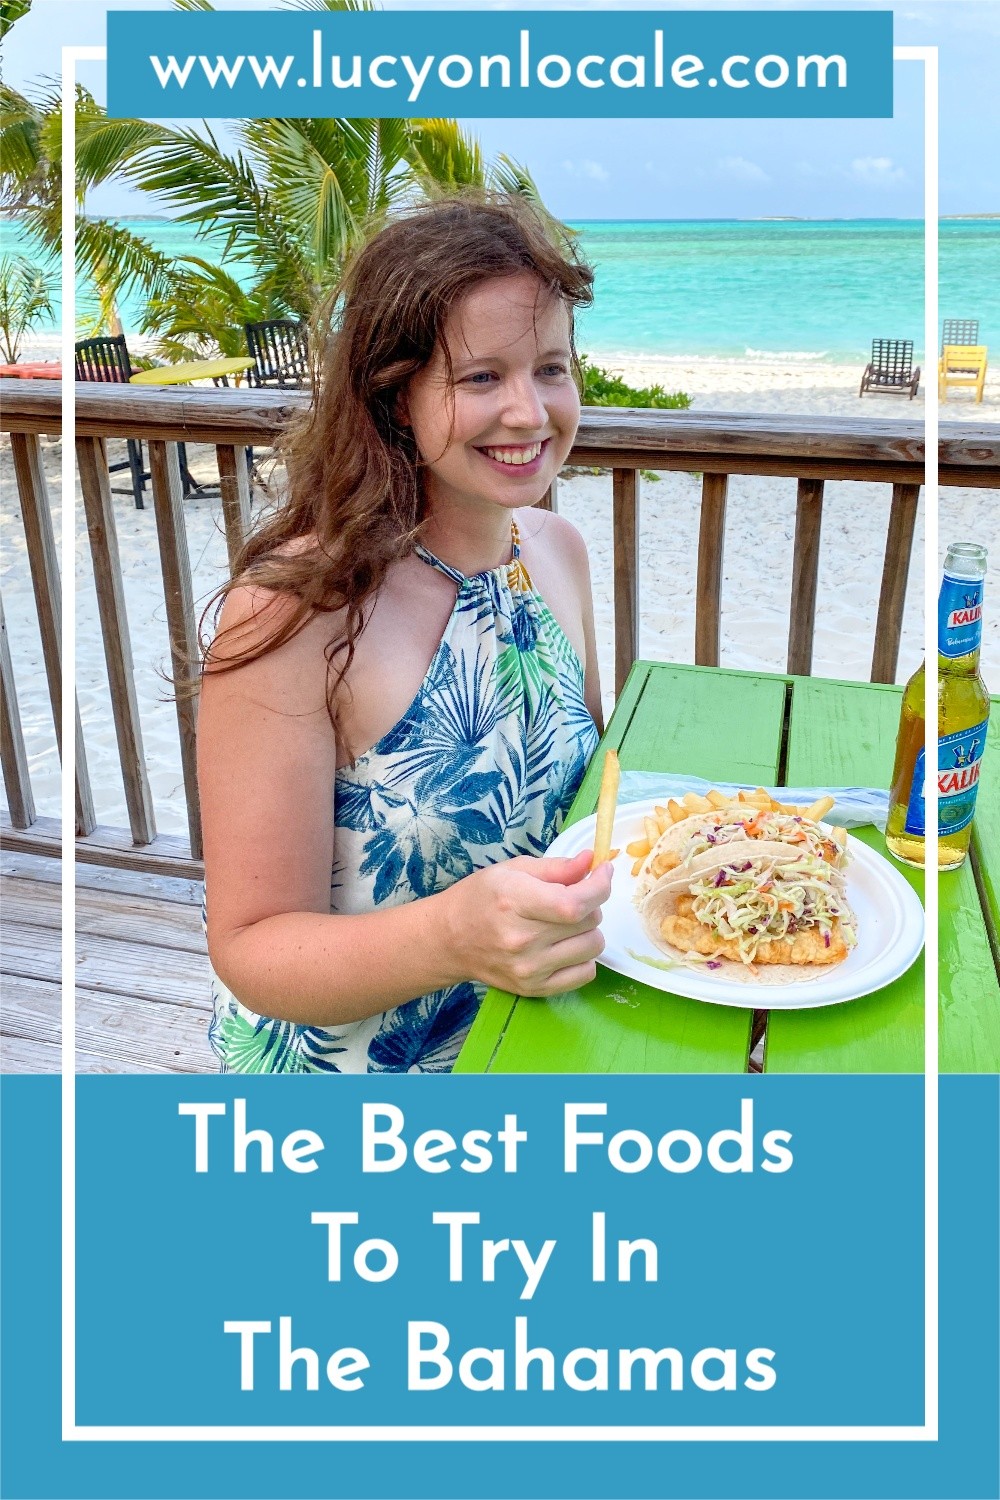 The Best Foods To Try in The Bahamas